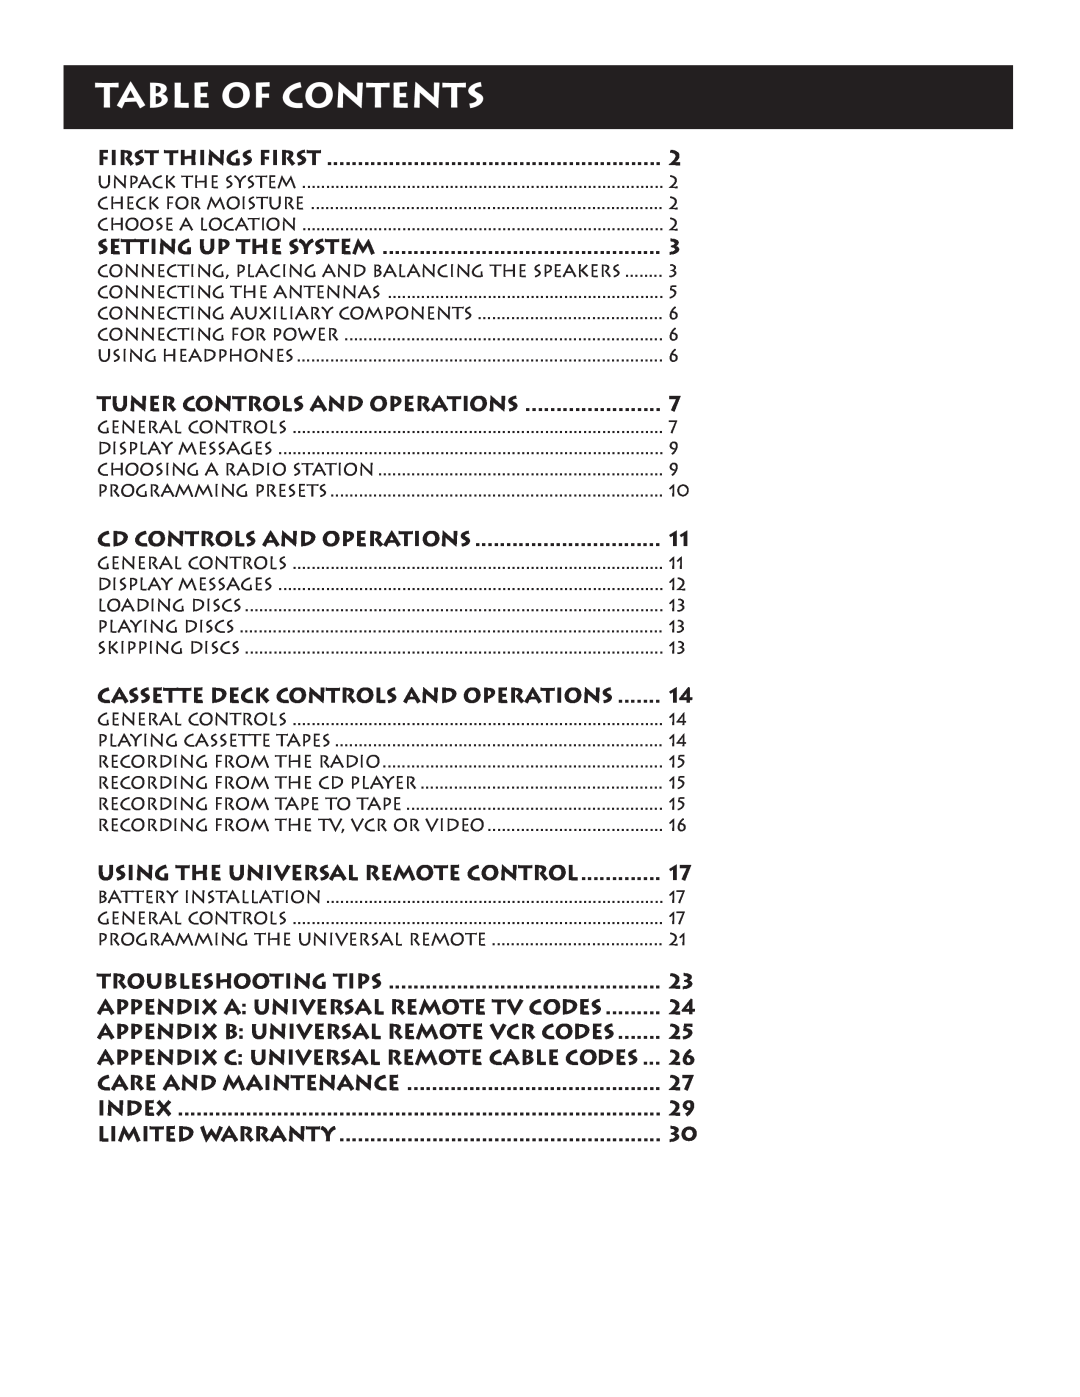 RCA RP-9380 manual Table Of Contents 